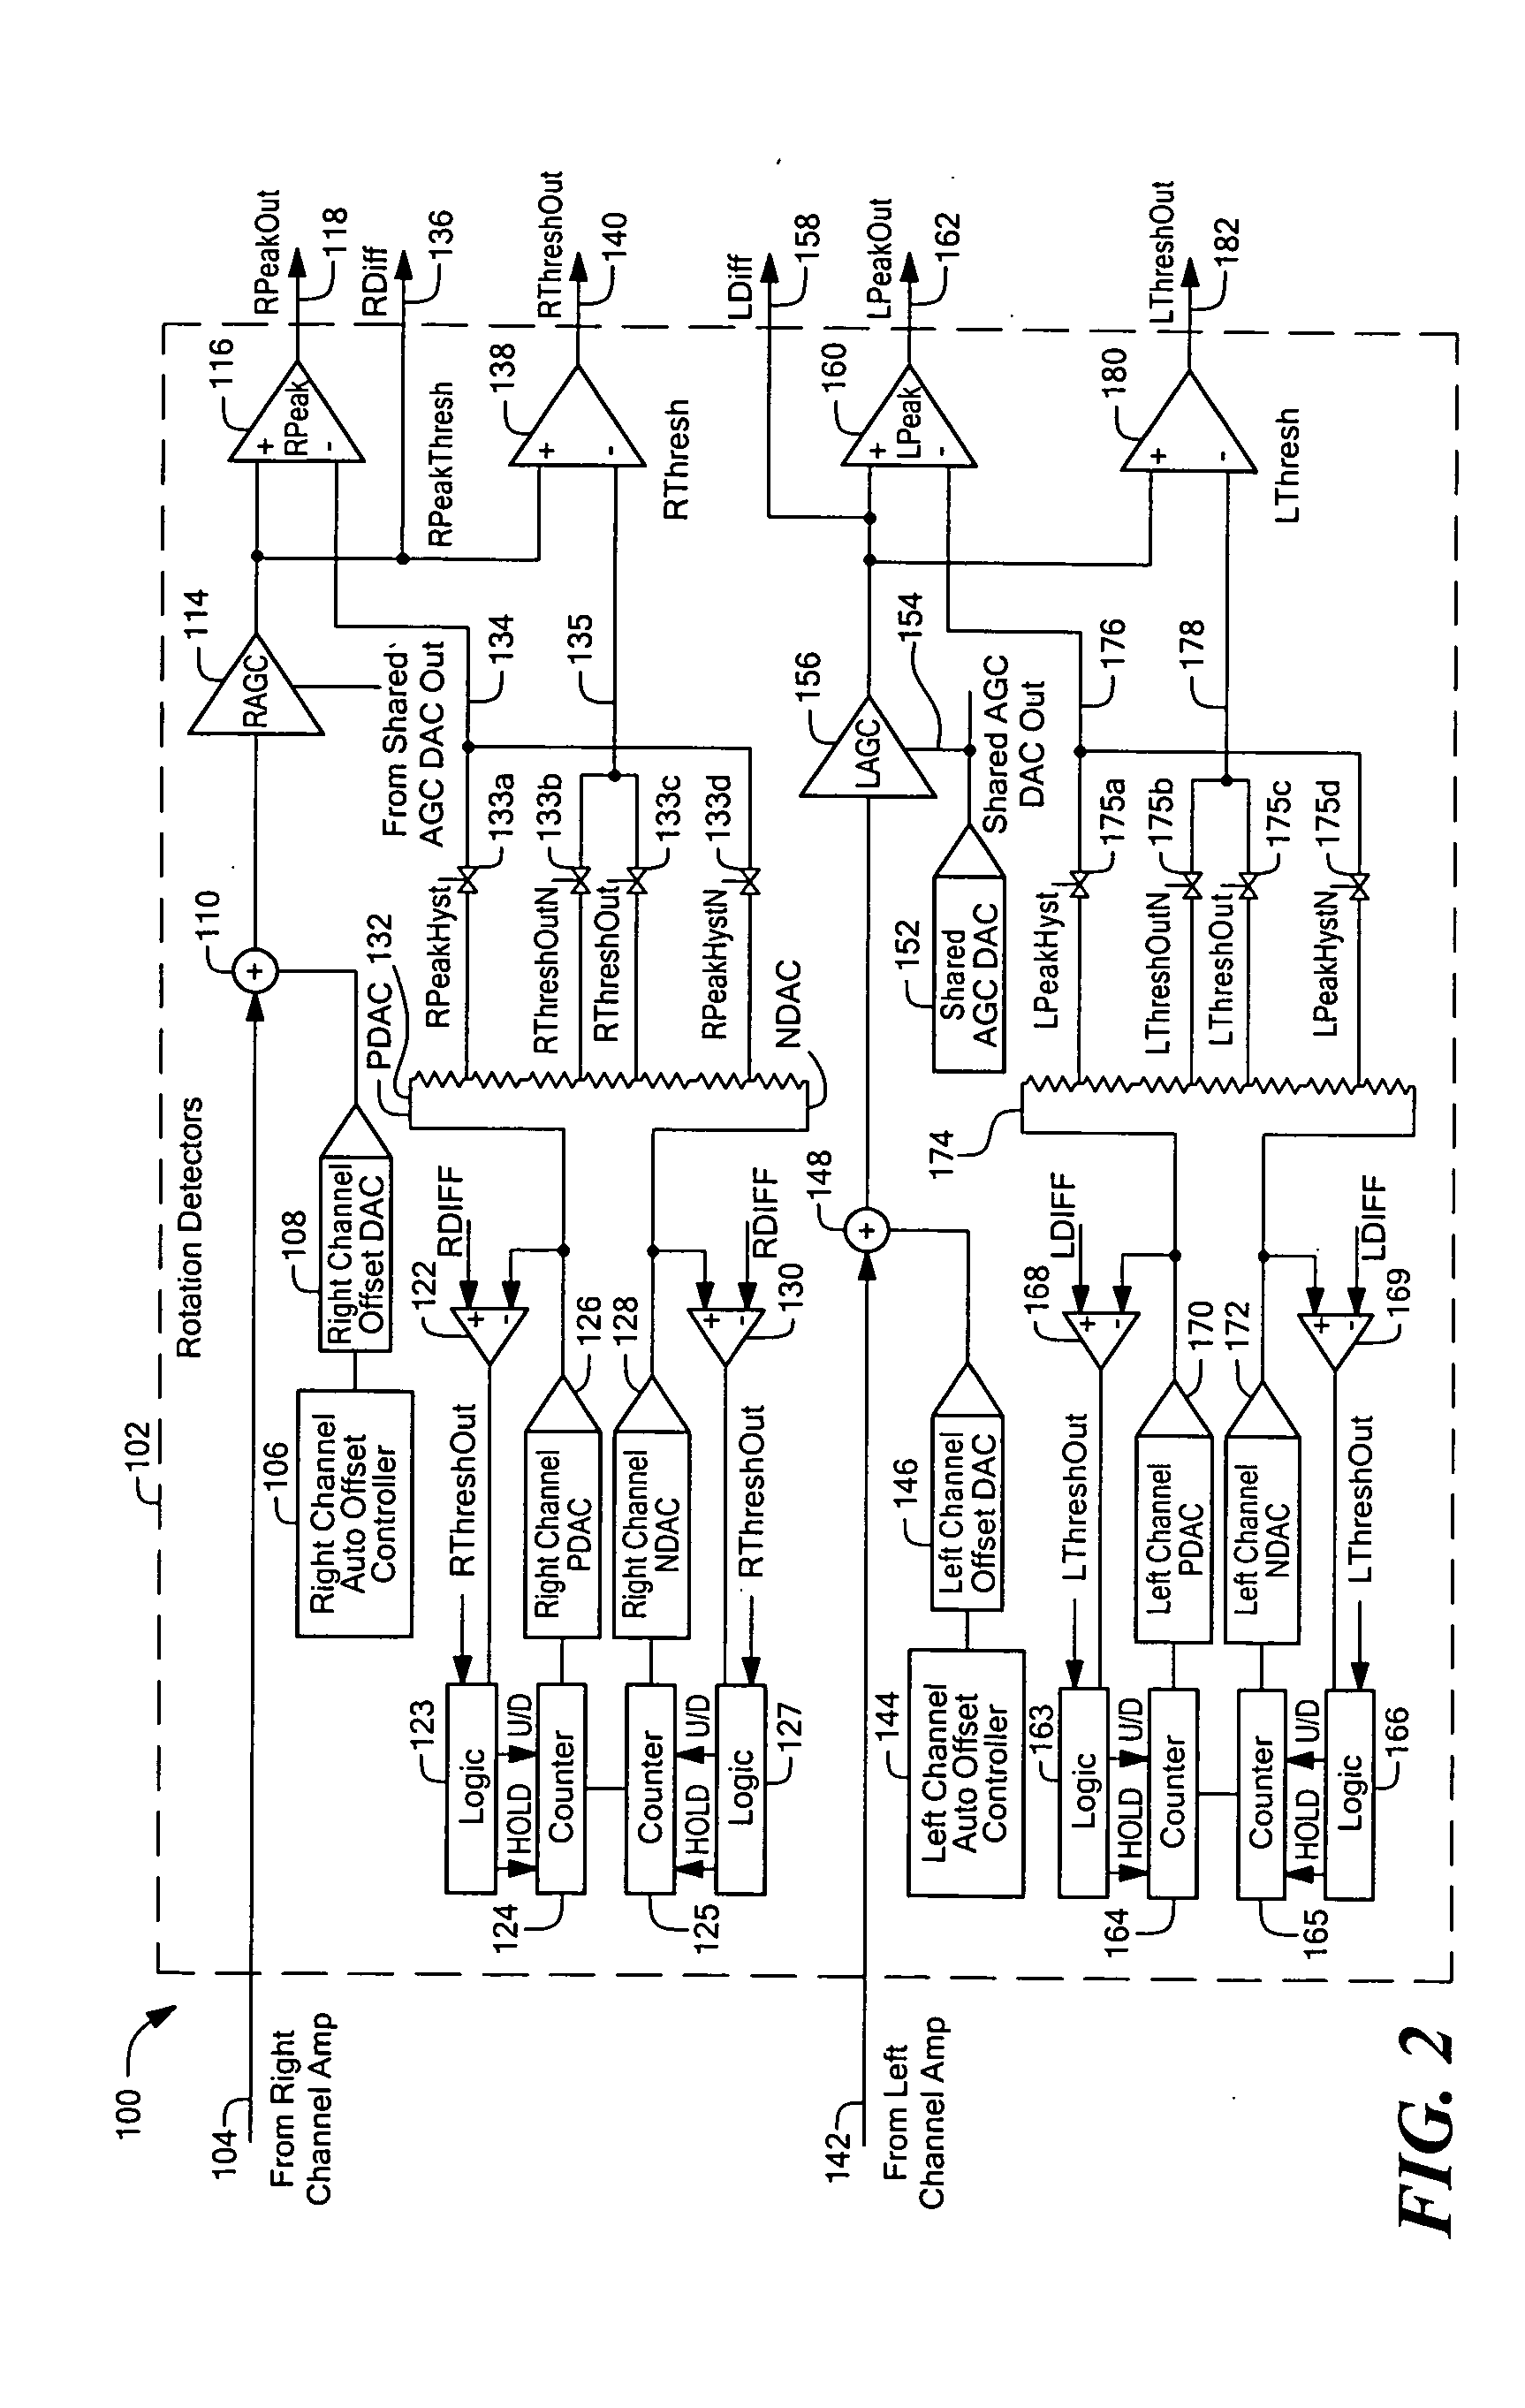 Method and apparatus for vibration detection